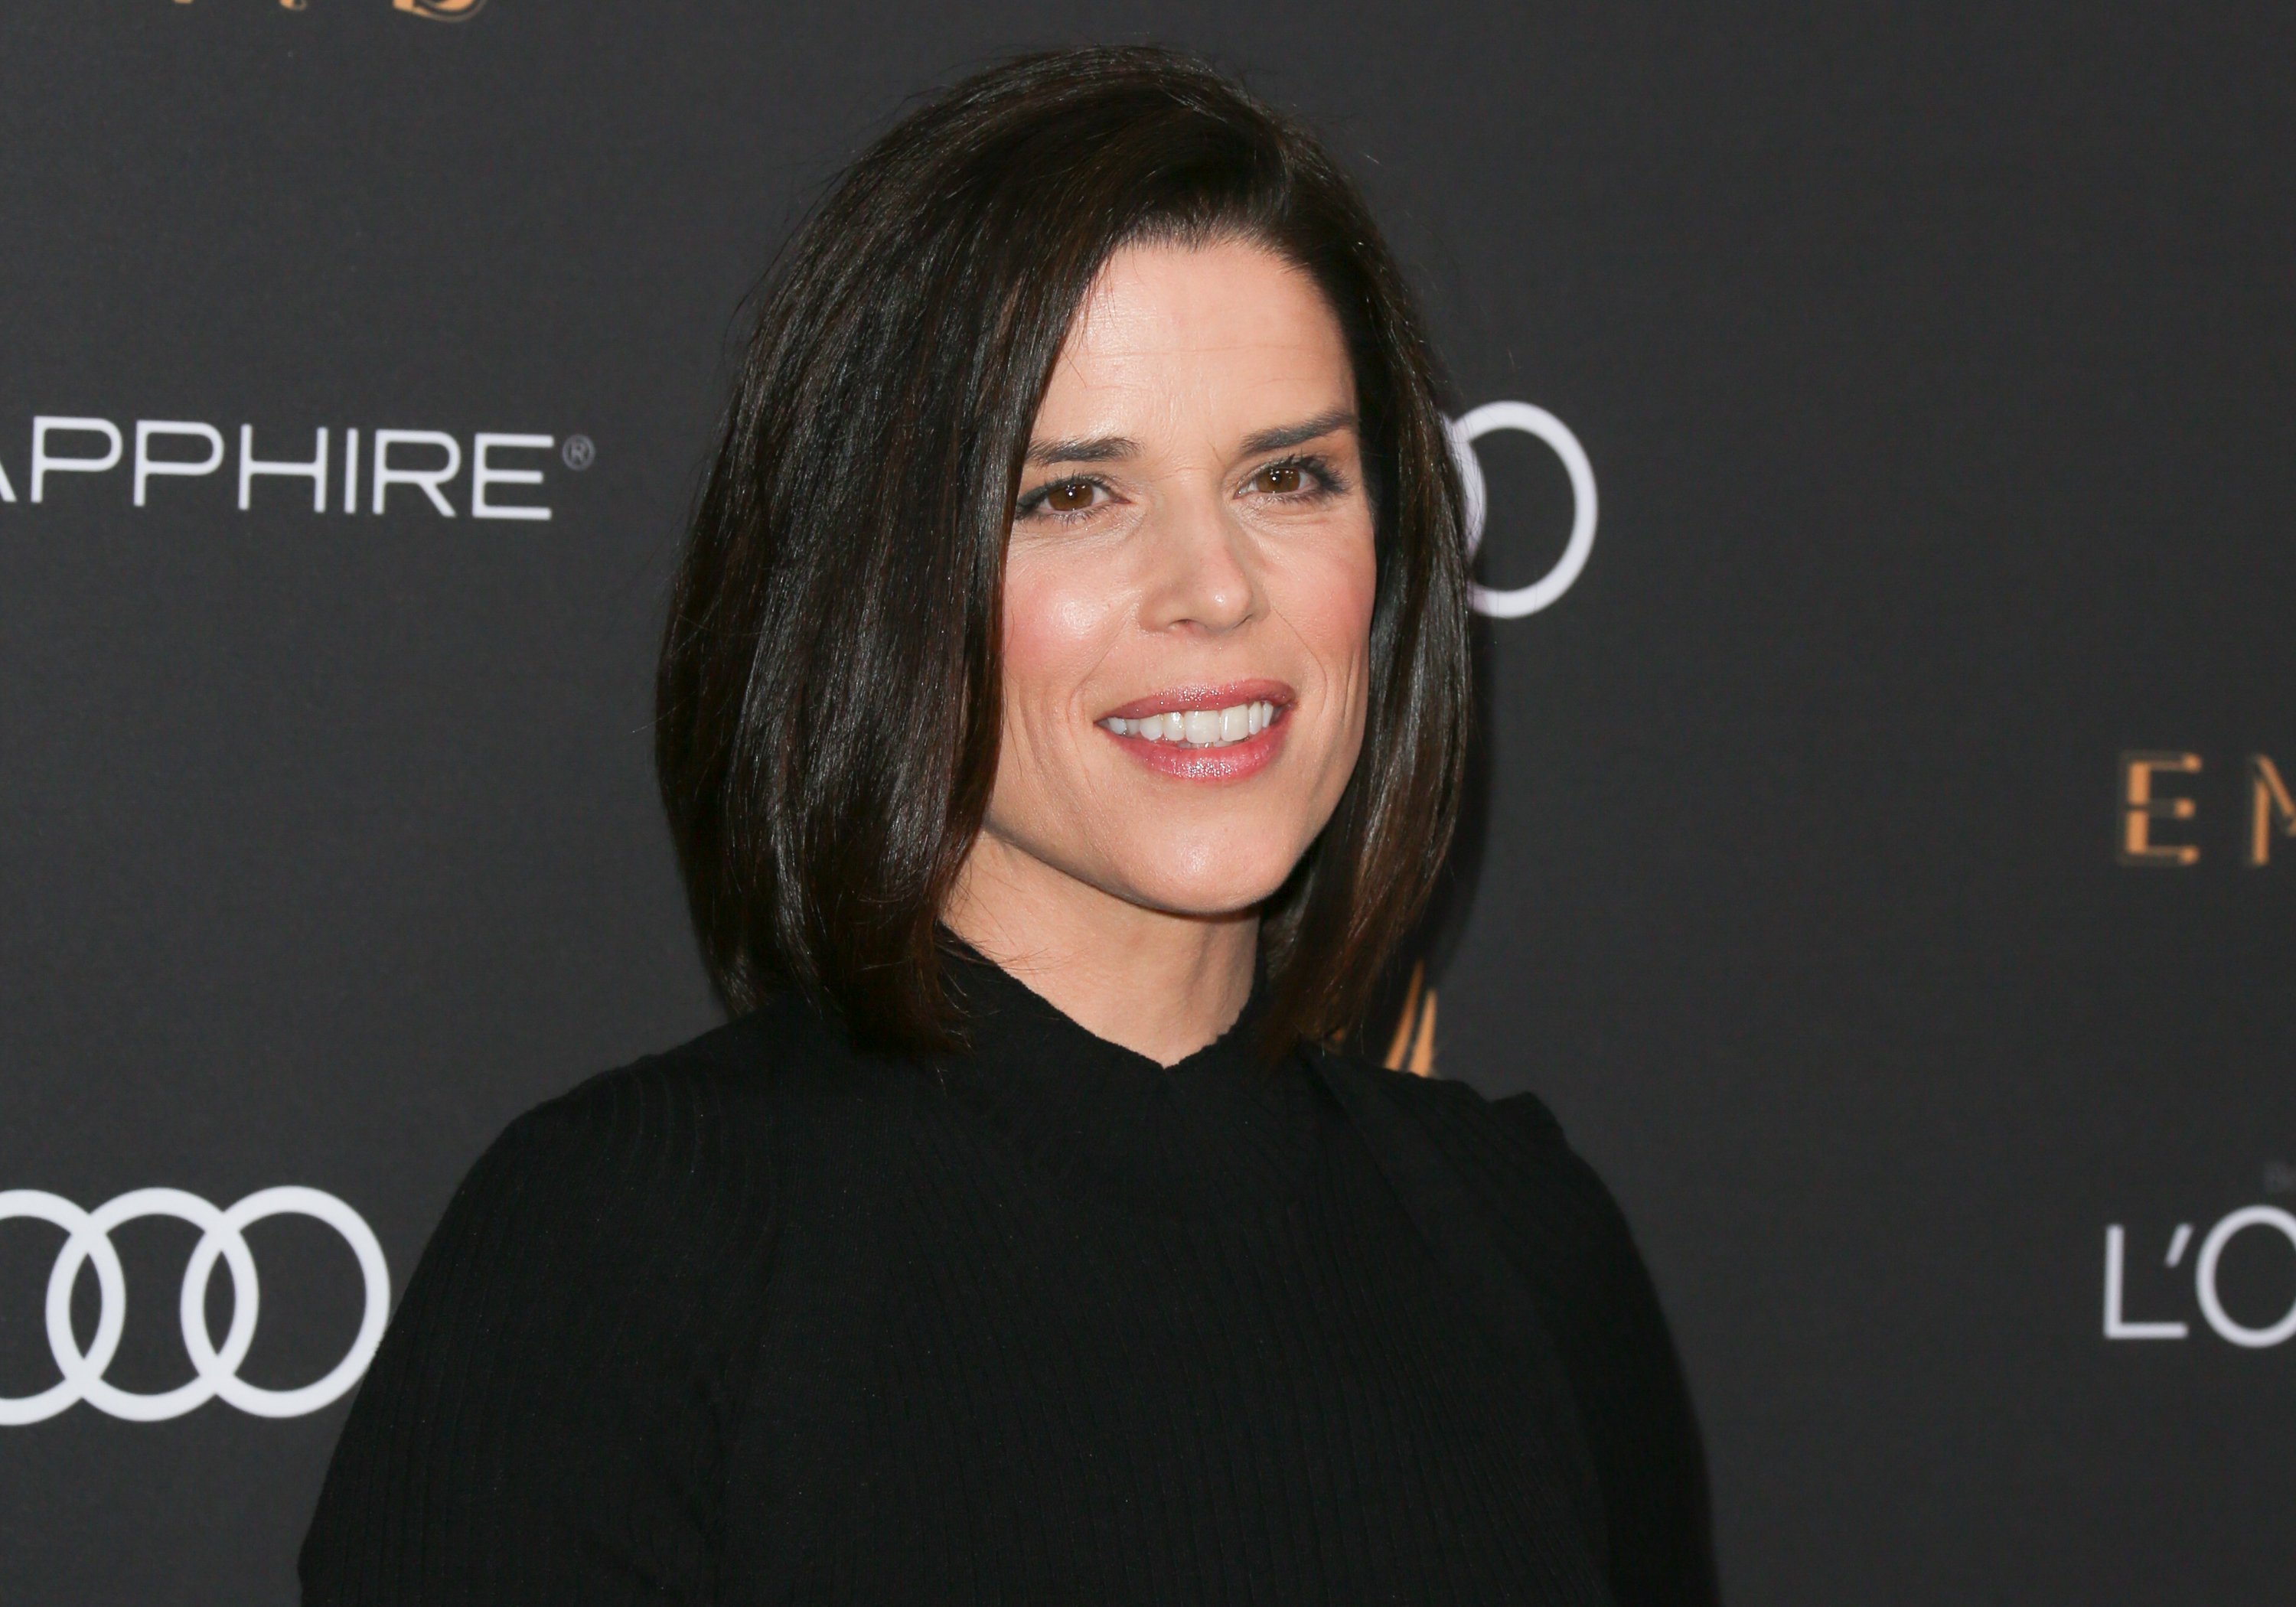 Neve Campbell attends the Television Academy event honoring Emmy nominated performers at The Wallis Annenberg Center for the Performing Arts on September 15, 2017, in Beverly Hills, California. | Source: Getty Images